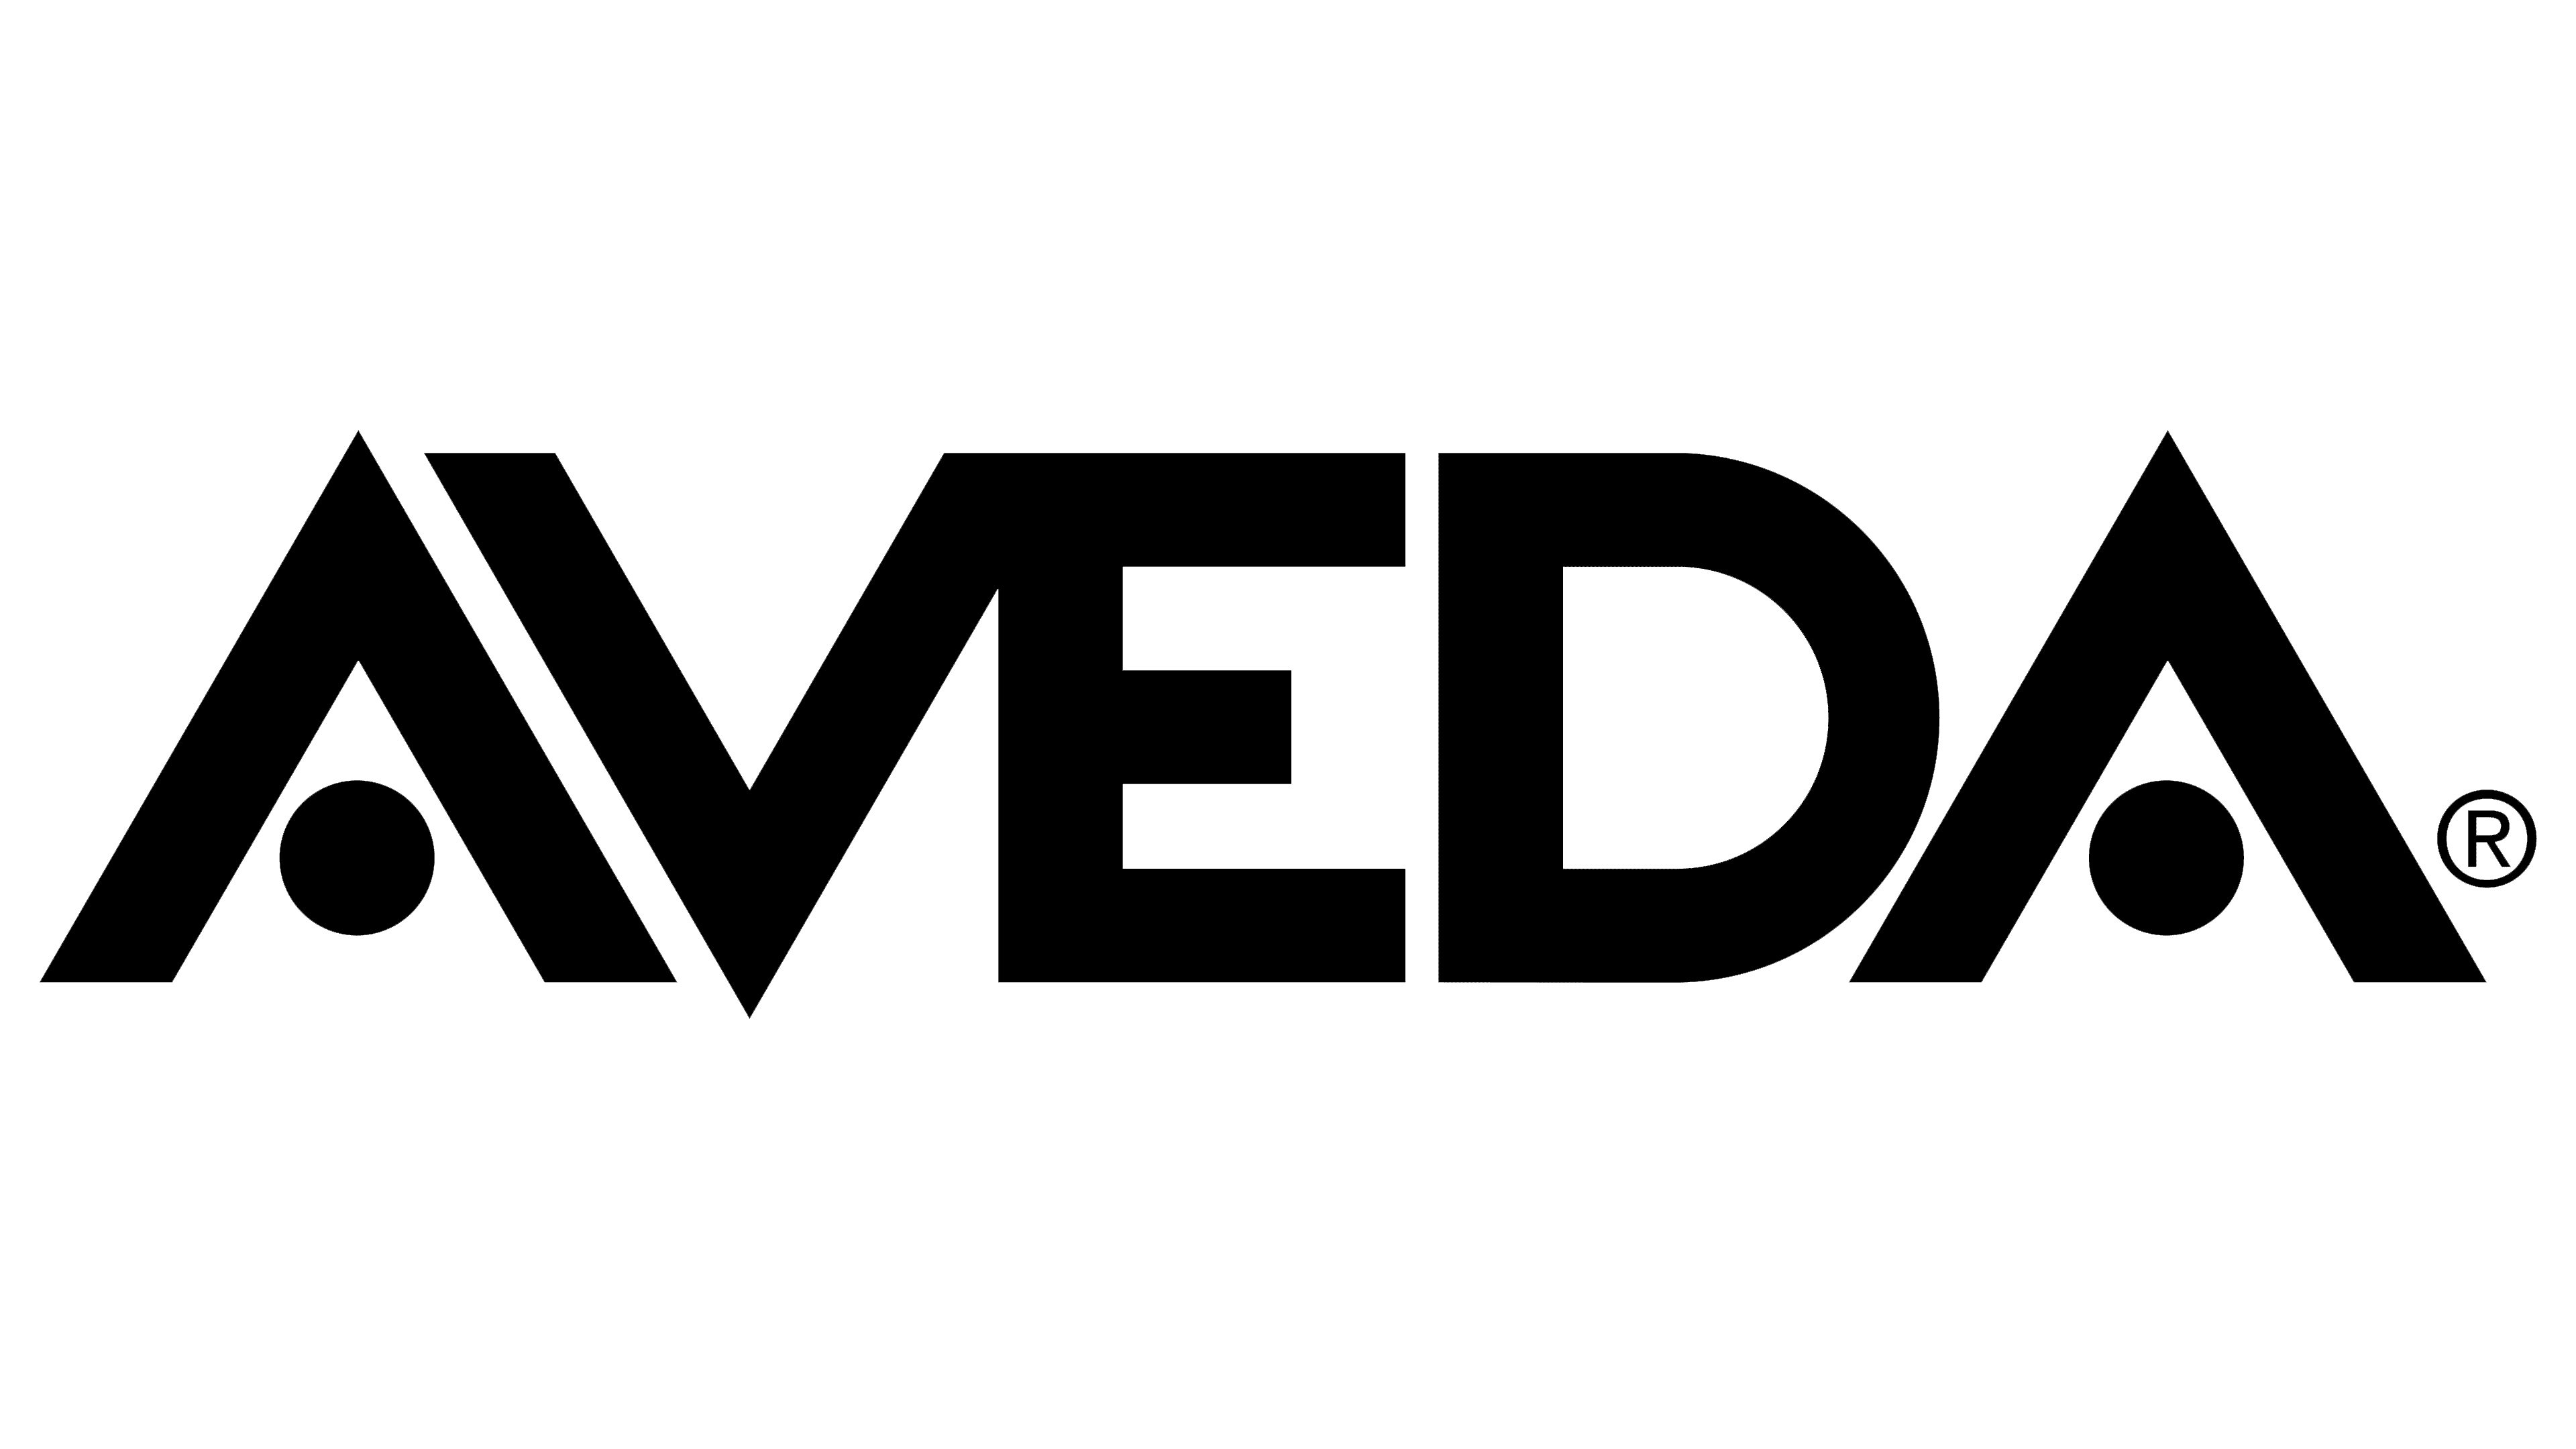 Aveda Logo, symbol, meaning, history, PNG, brand